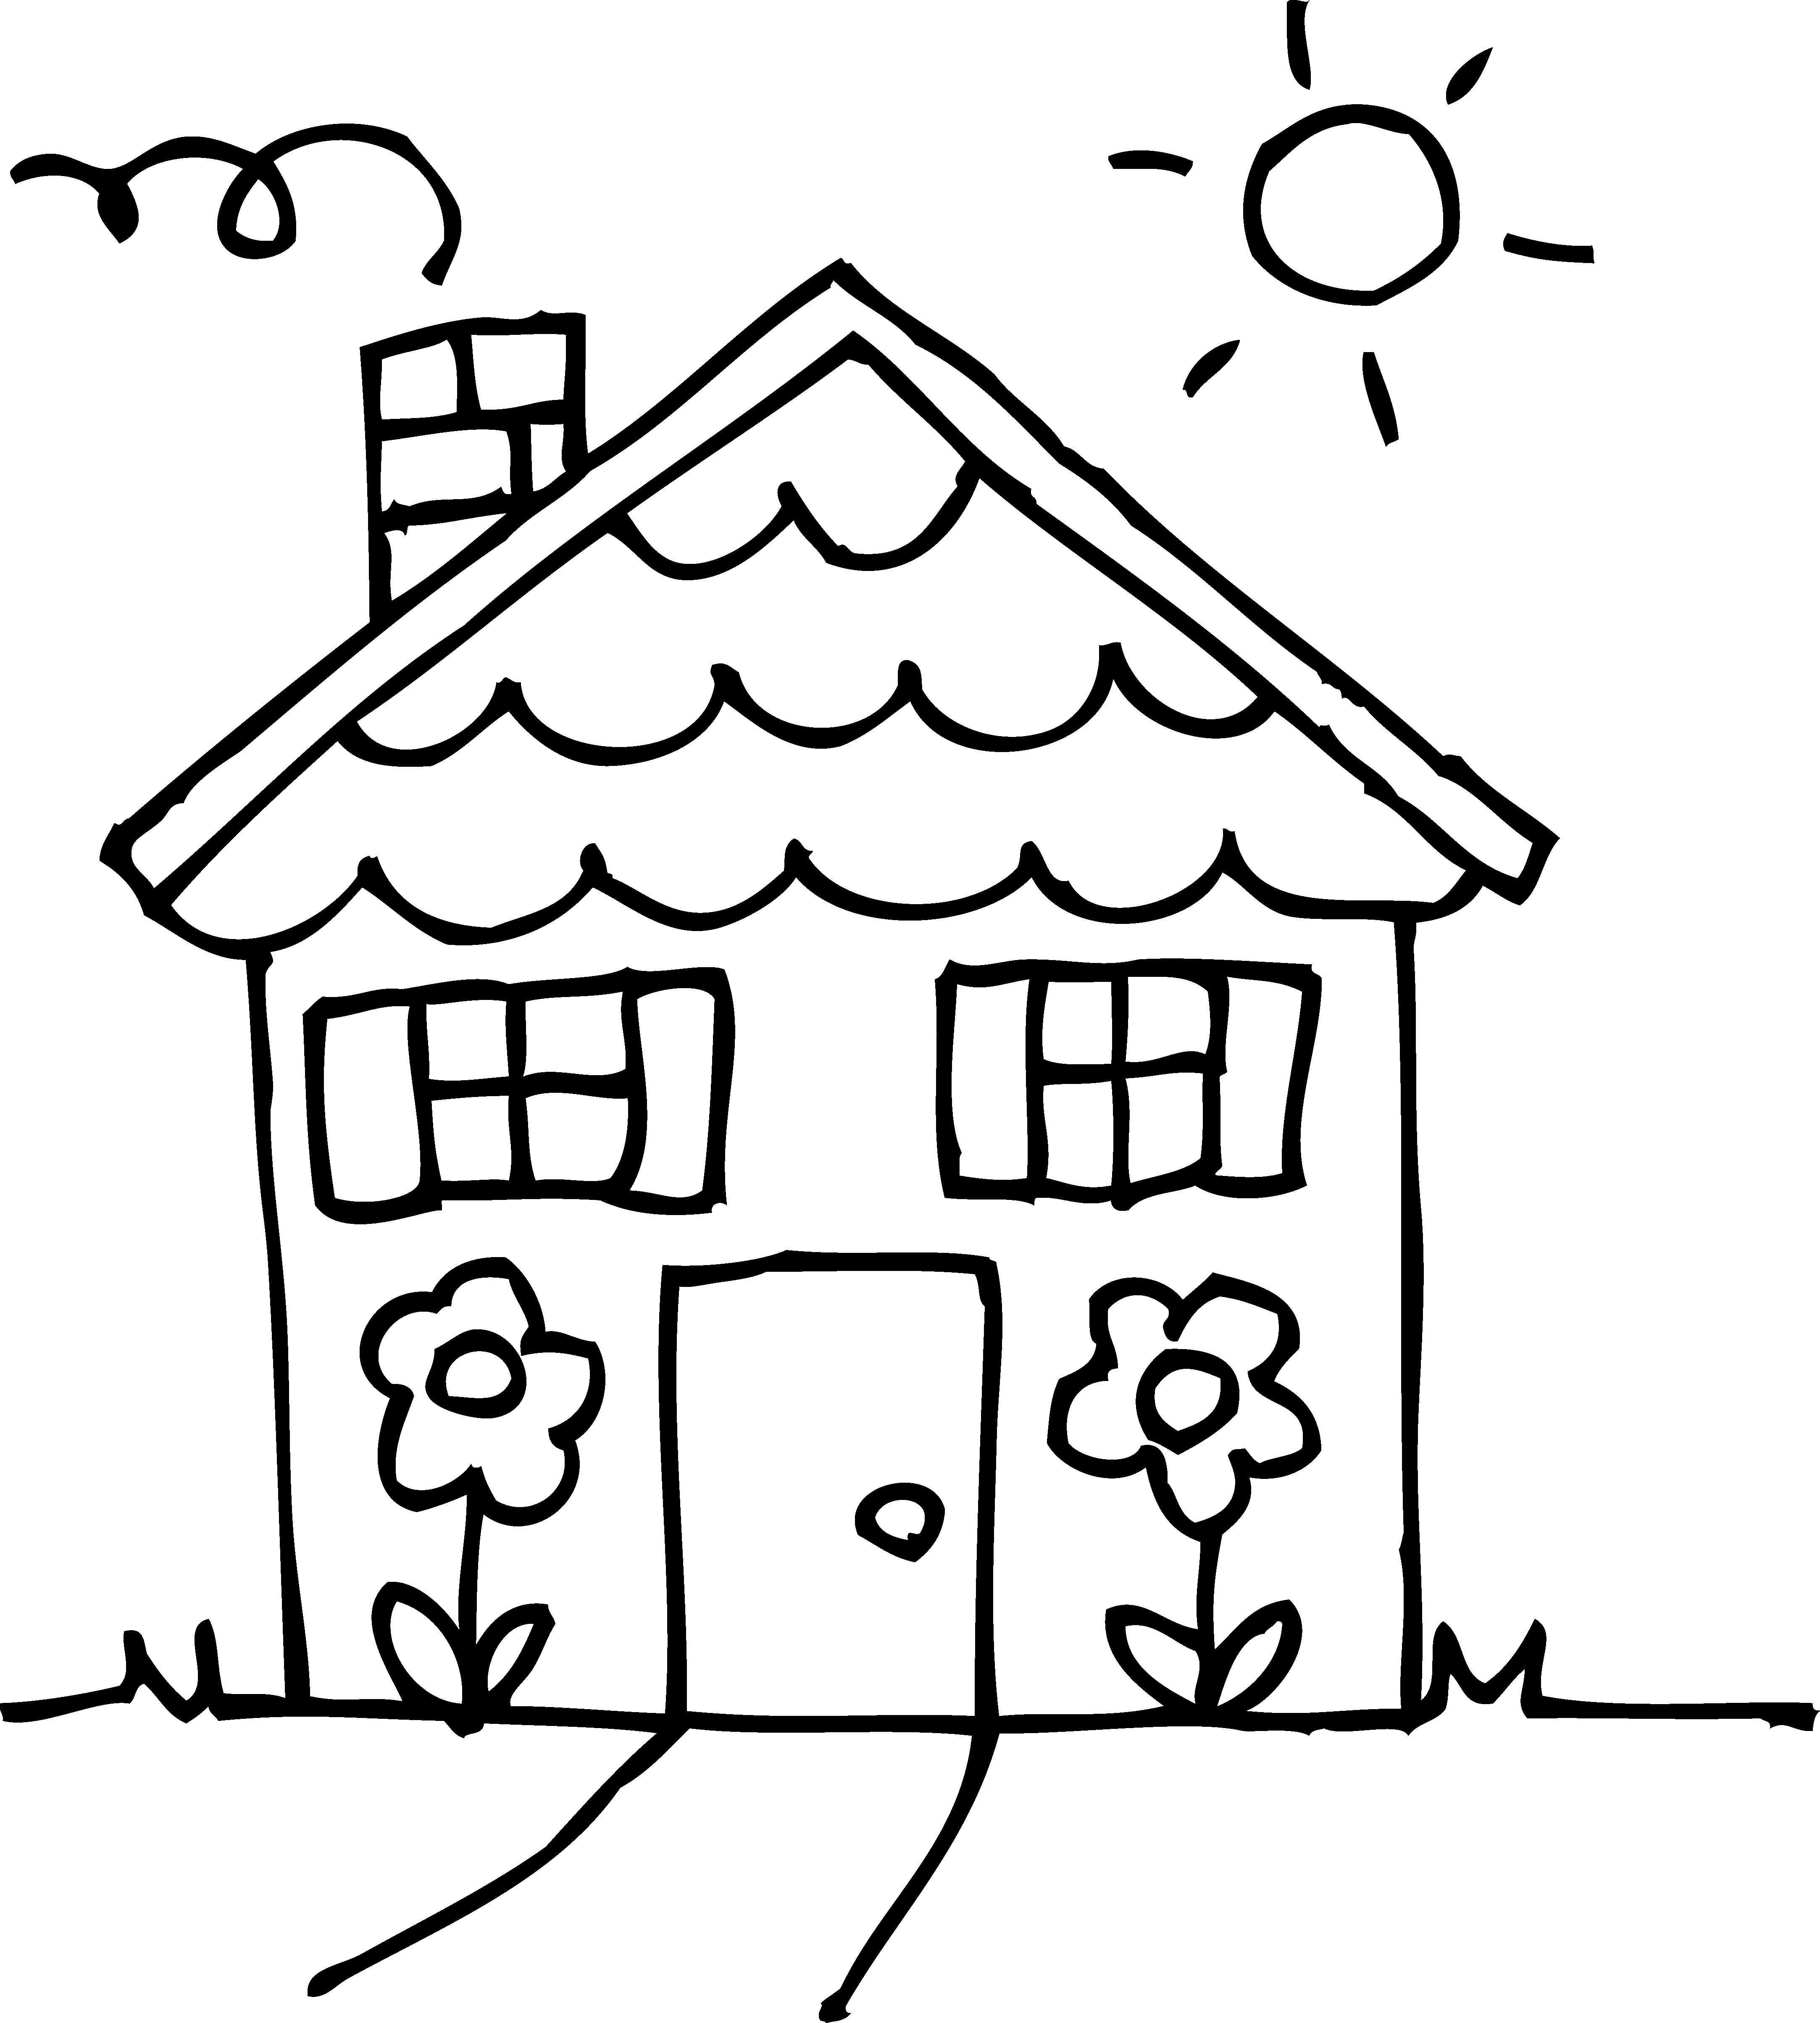 Download Black And White House Clipart House Clipart Black And White Png Image With No Background Pngkey Com